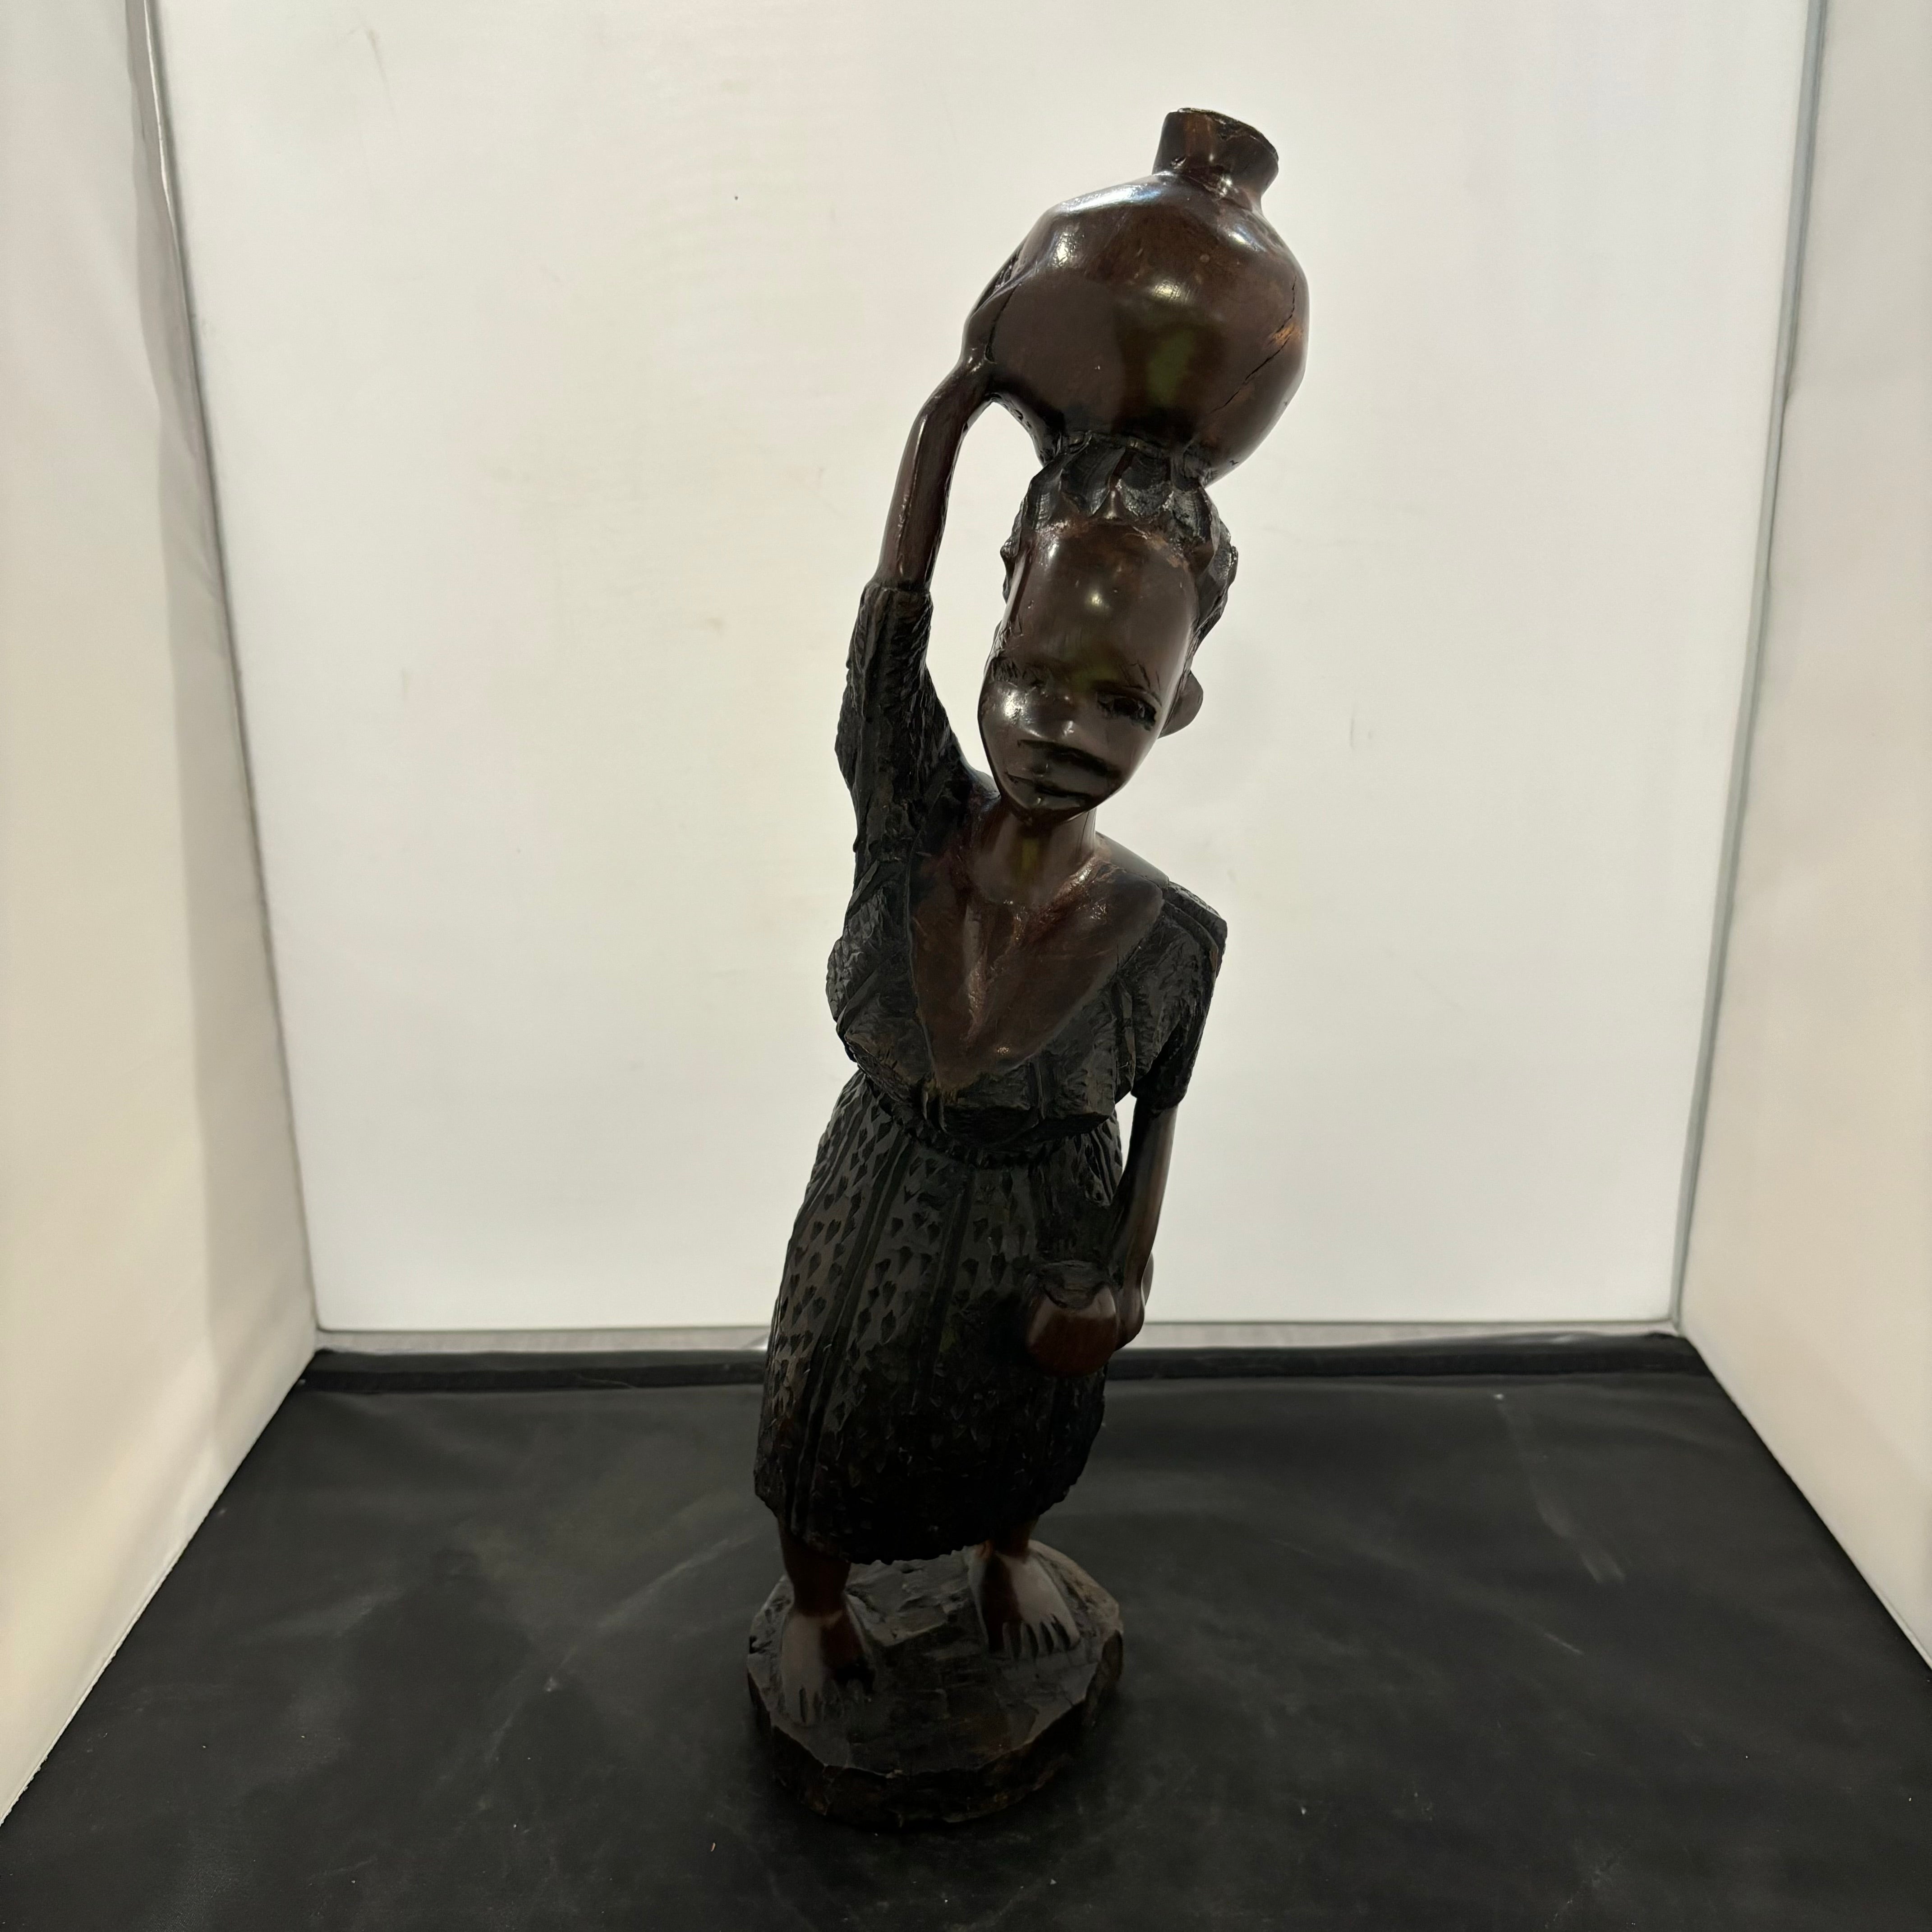 Hand Carved Iron Wood Leaning Woman with Jug on Head Figurine 19"x 5"